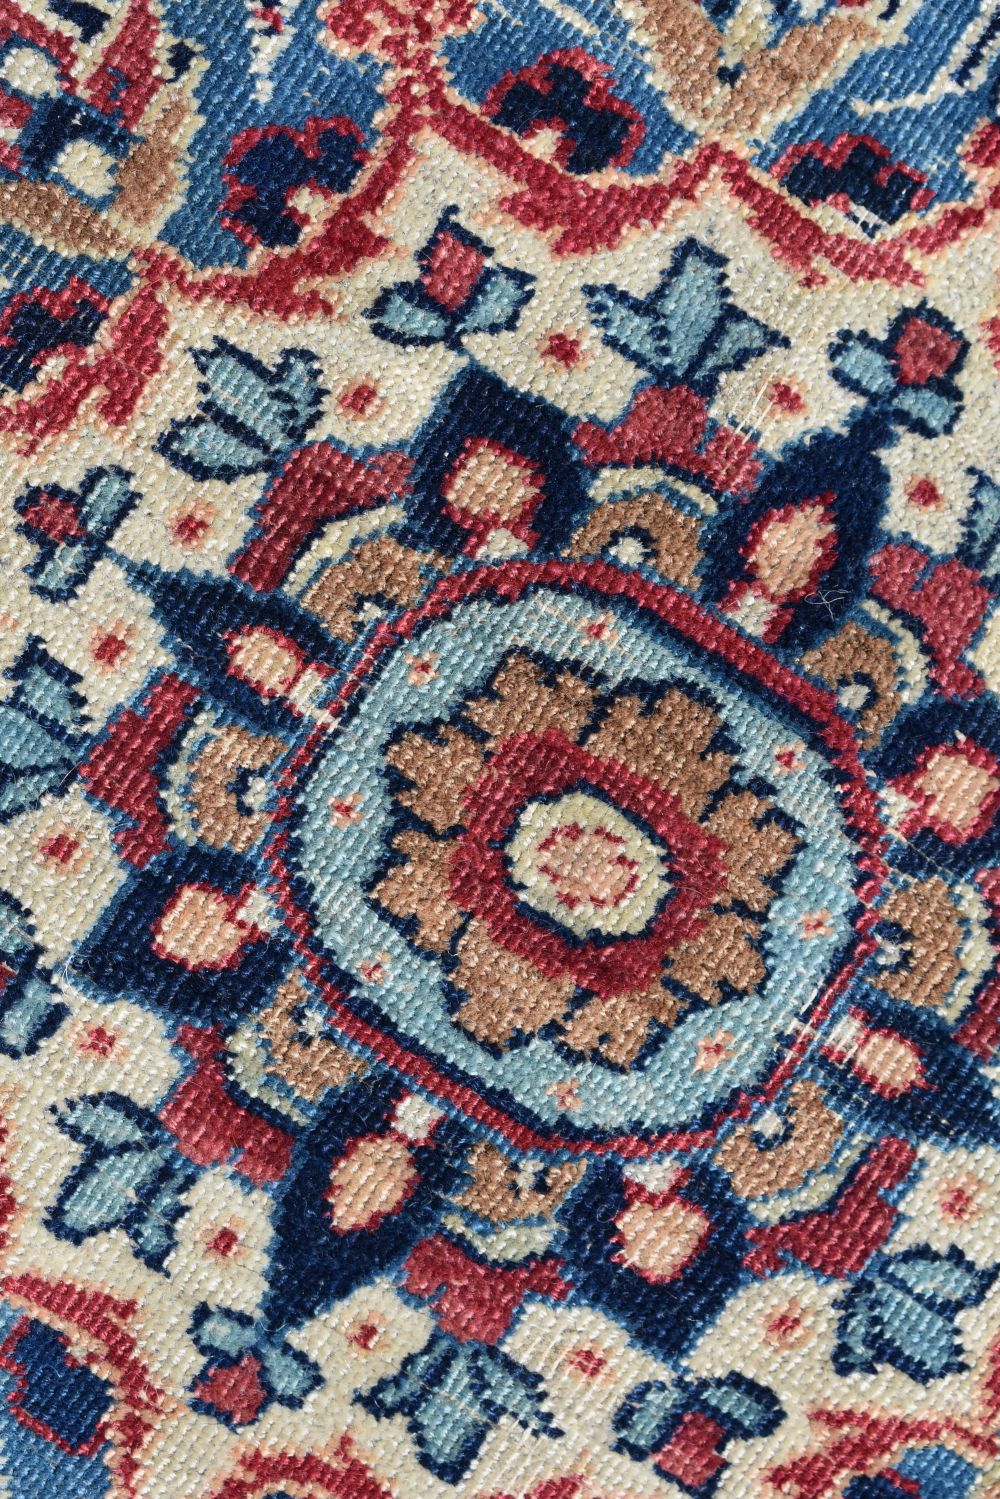 A Persian rug 189 x 122 cm - Image 12 of 14